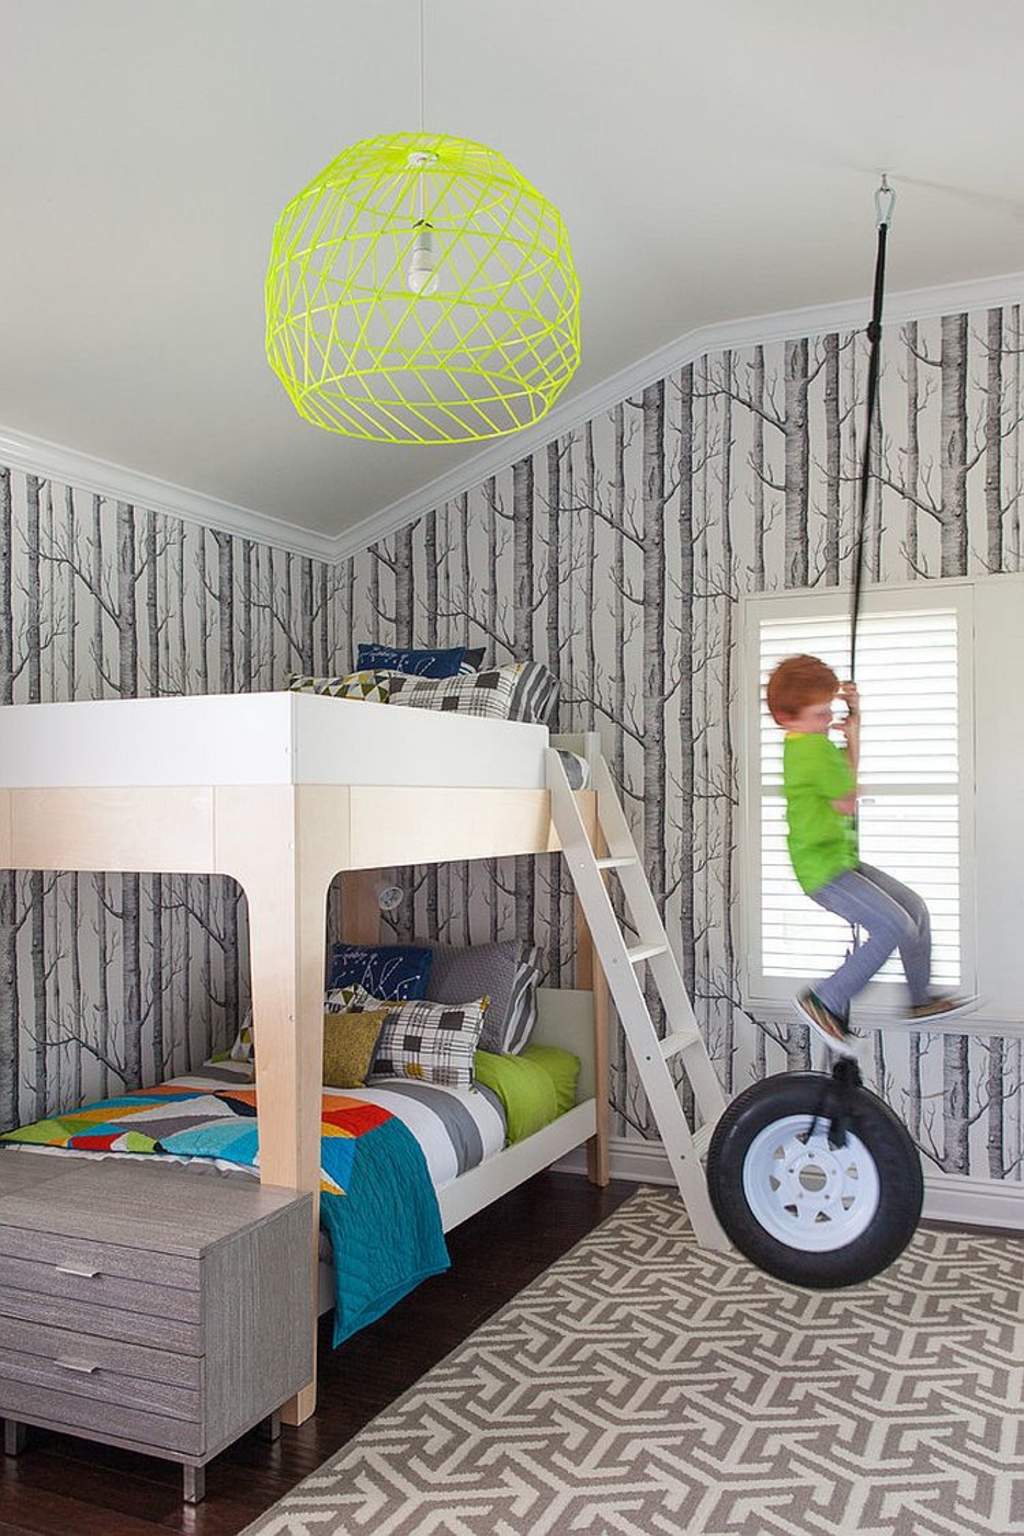 Woods Wallpaper And Rug Bring Gray Into This Bedroom Cool